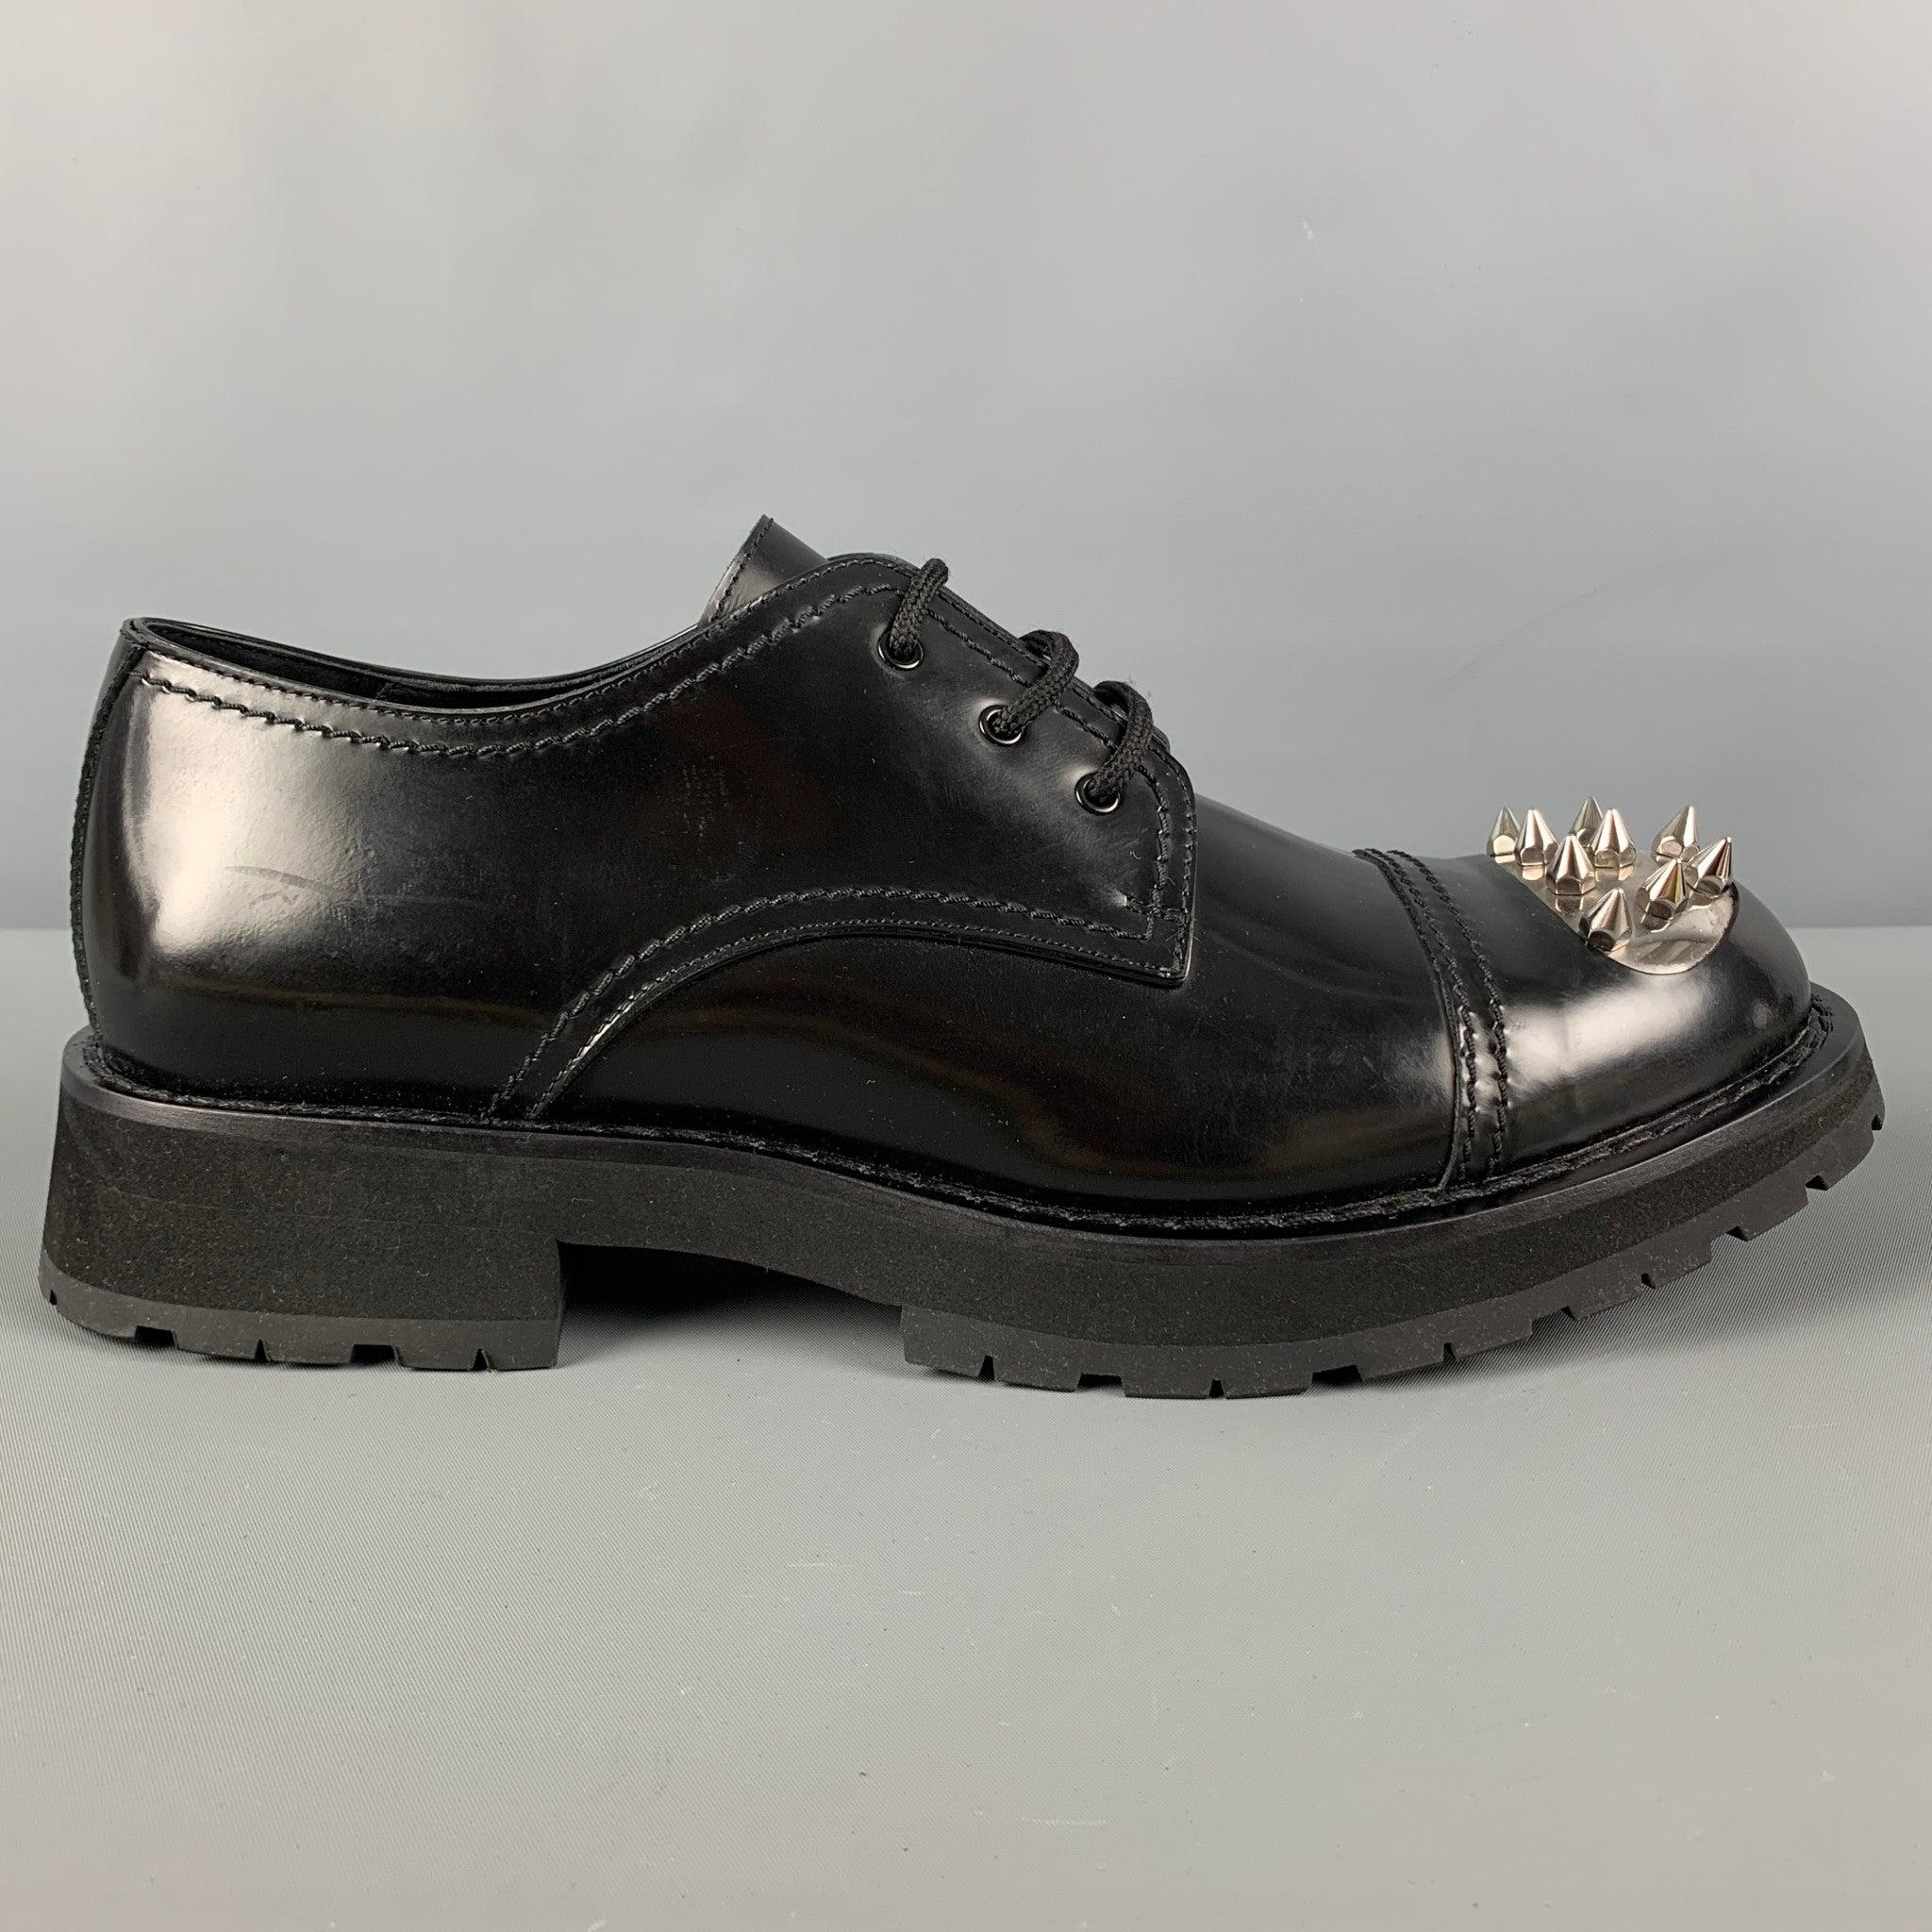 ALEXANDER McQUEEN shoes comes in a black leather featuring a silver tone spike toe design, cap toe, chunky sole, and a lace up closure. Includes box. Made in Italy.
Excellent
Pre-Owned Condition. 

Marked:   45Outsole: 13.5 inches  x 5 inches 
  
 